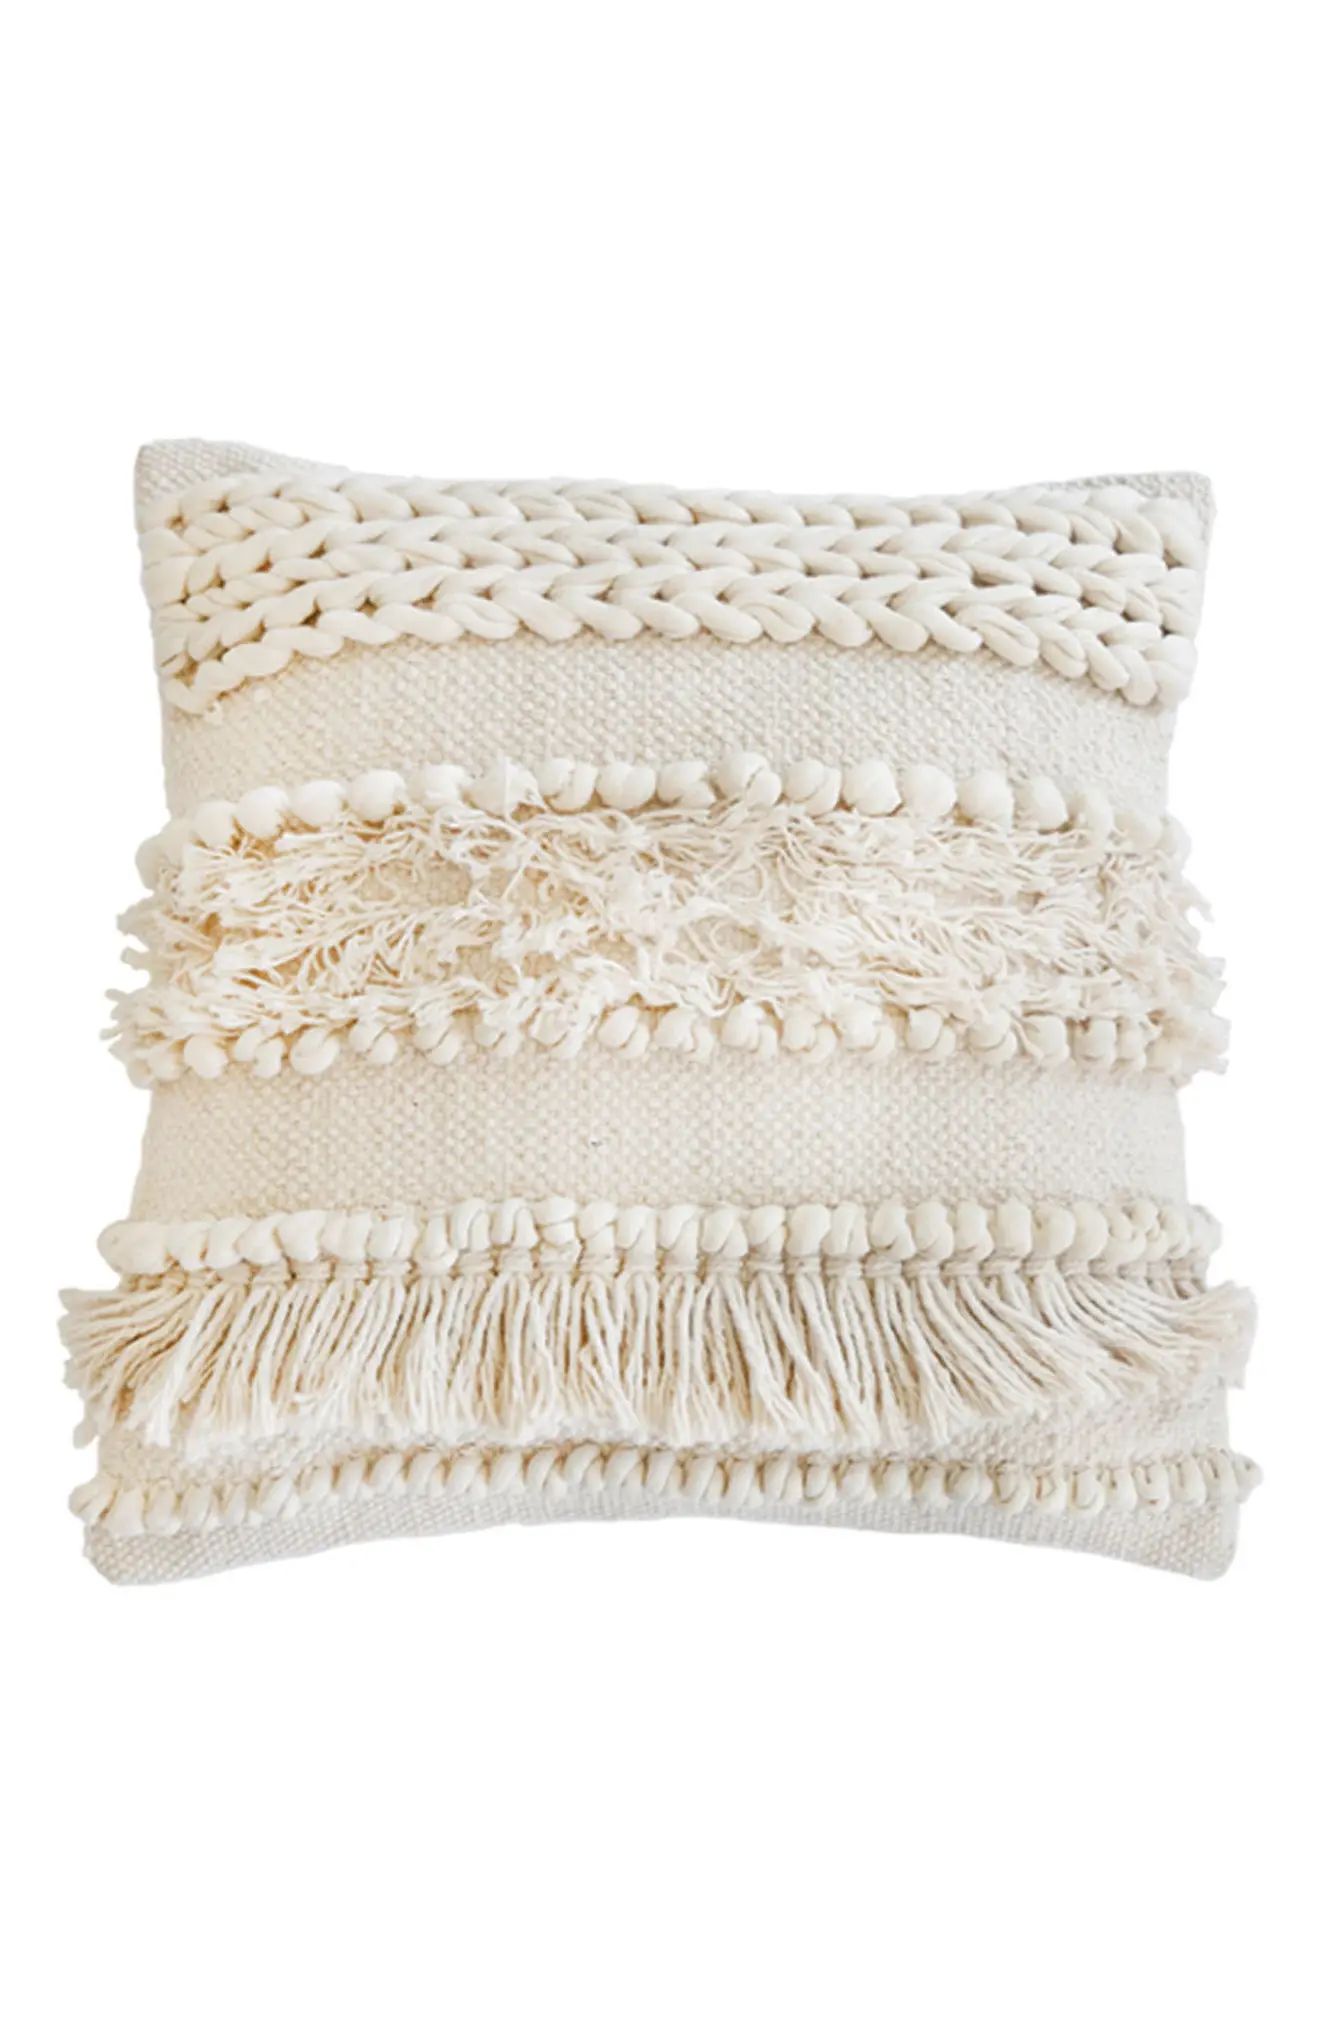 Pom Pom at Home Iman Accent Pillow | Nordstrom